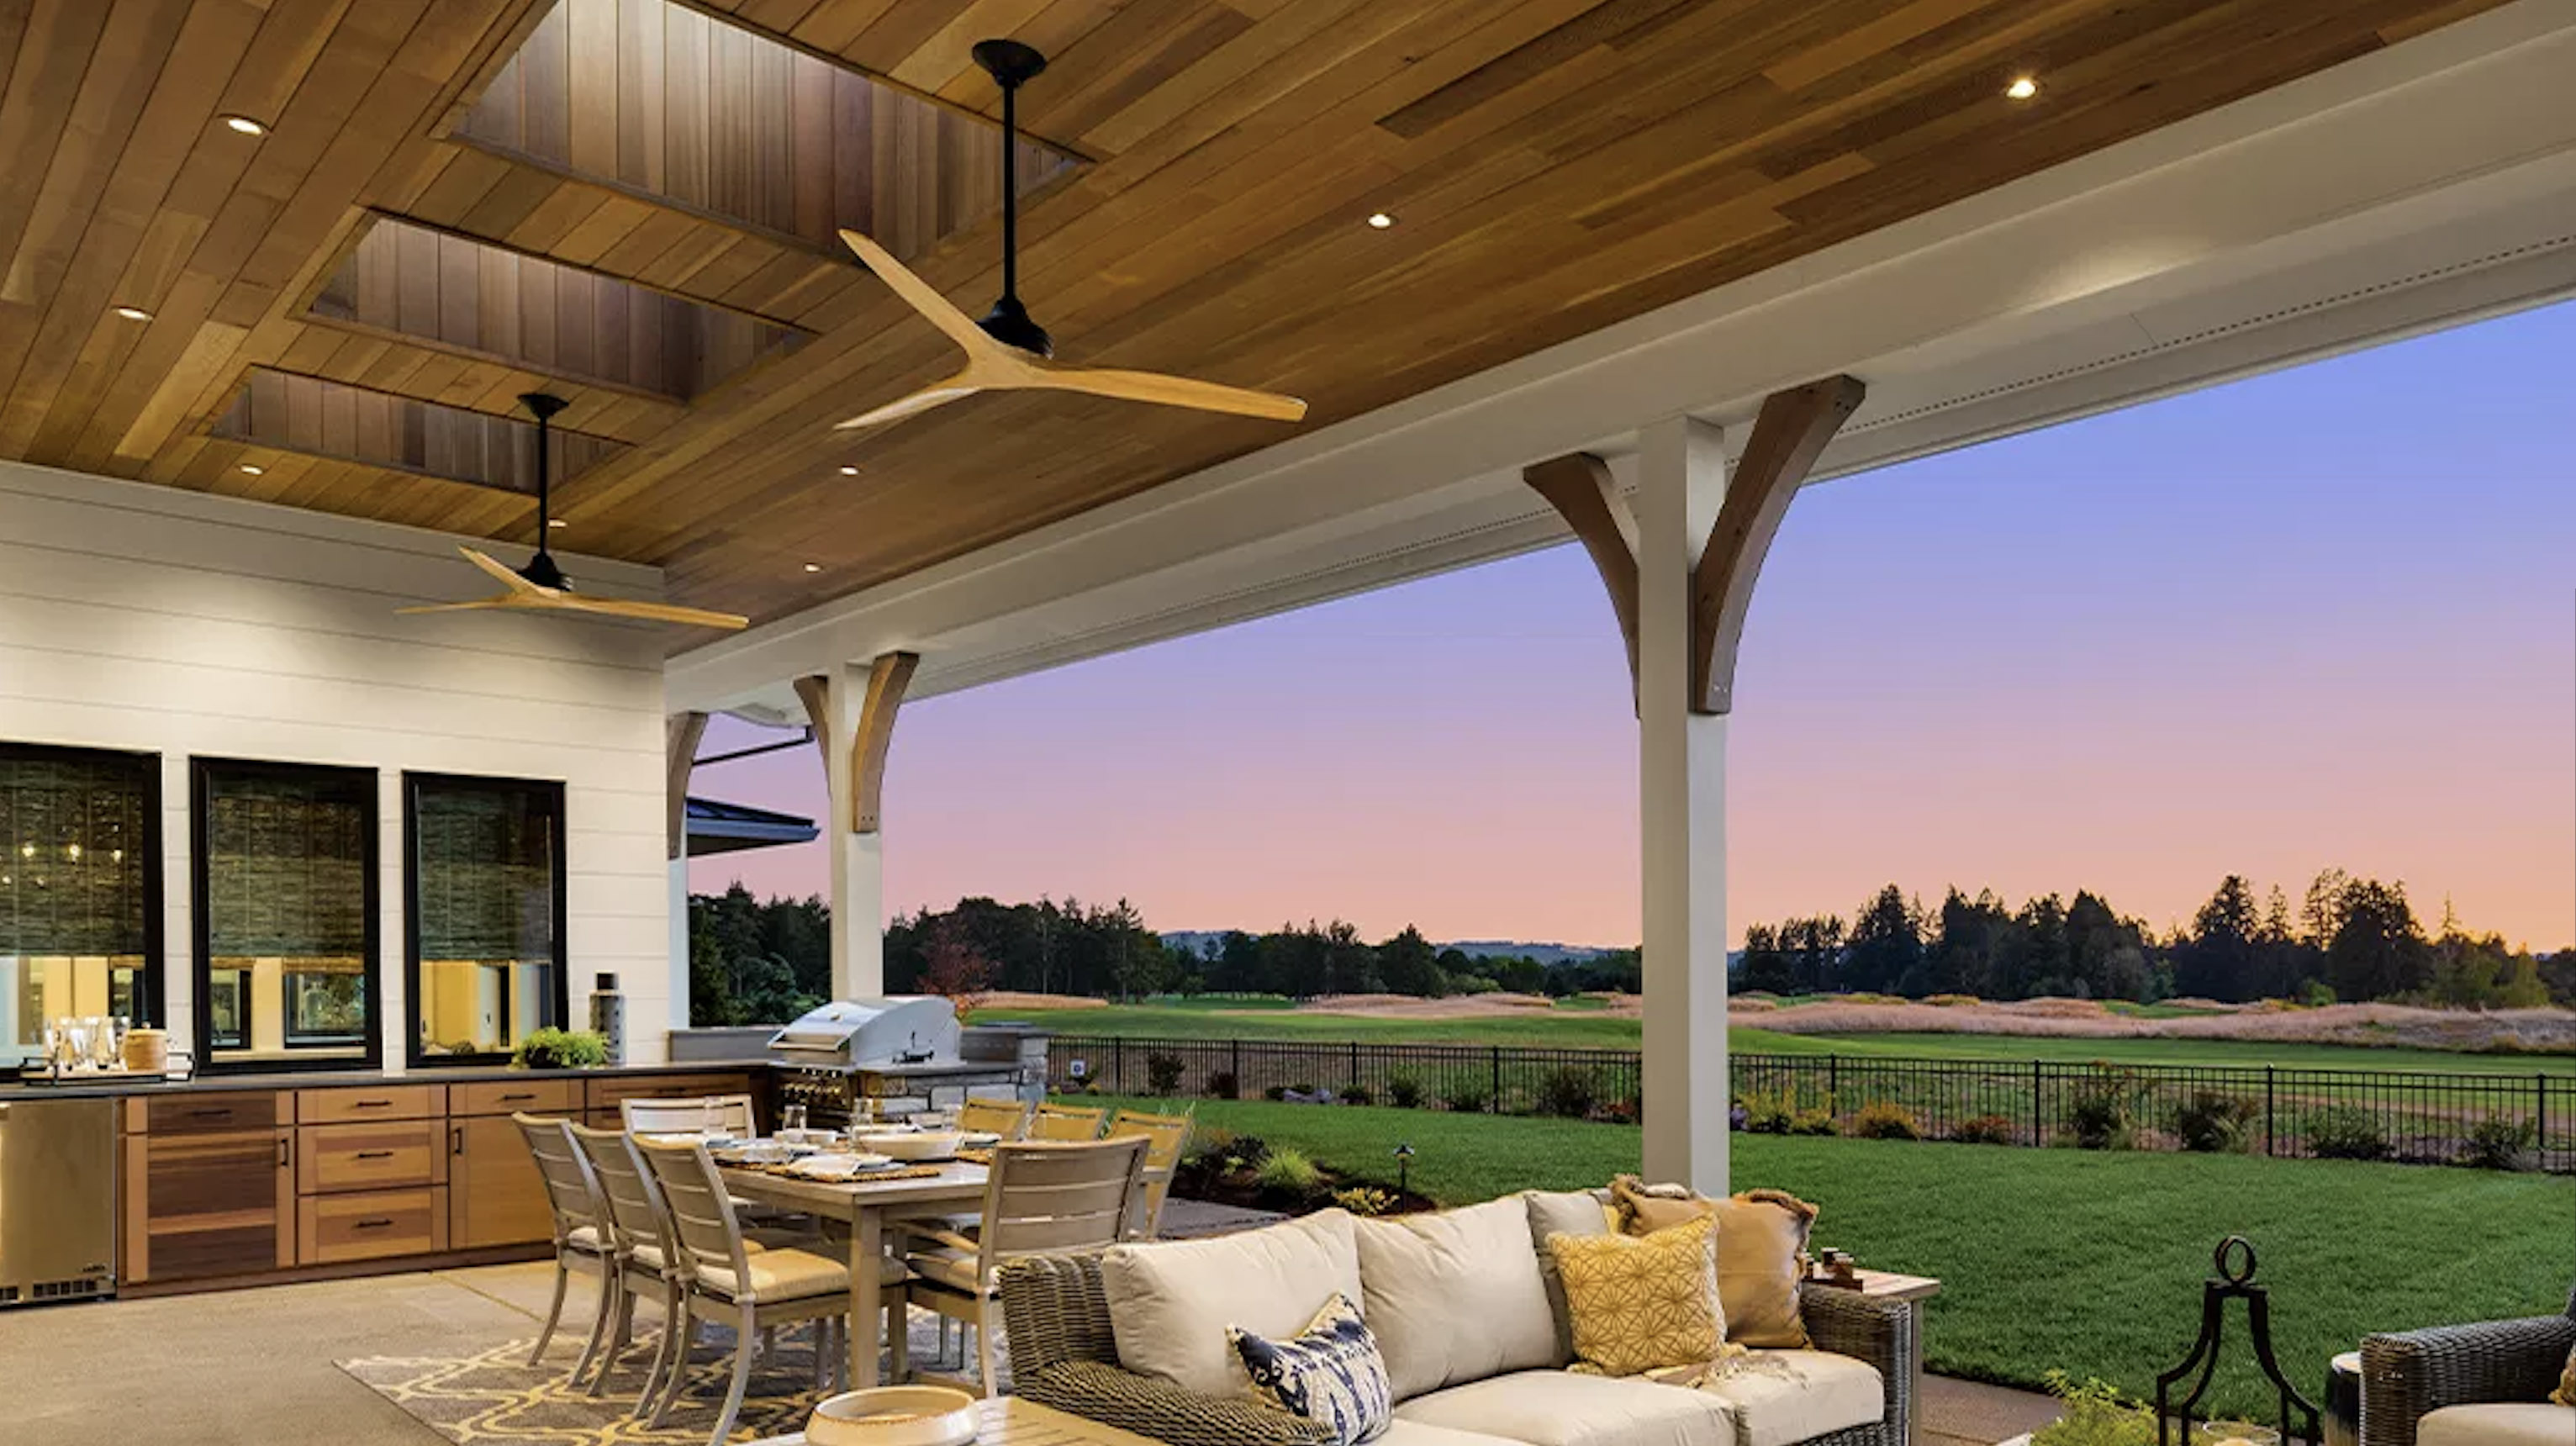 What Makes A Better Outdoor Ceiling Fans for Your Patio